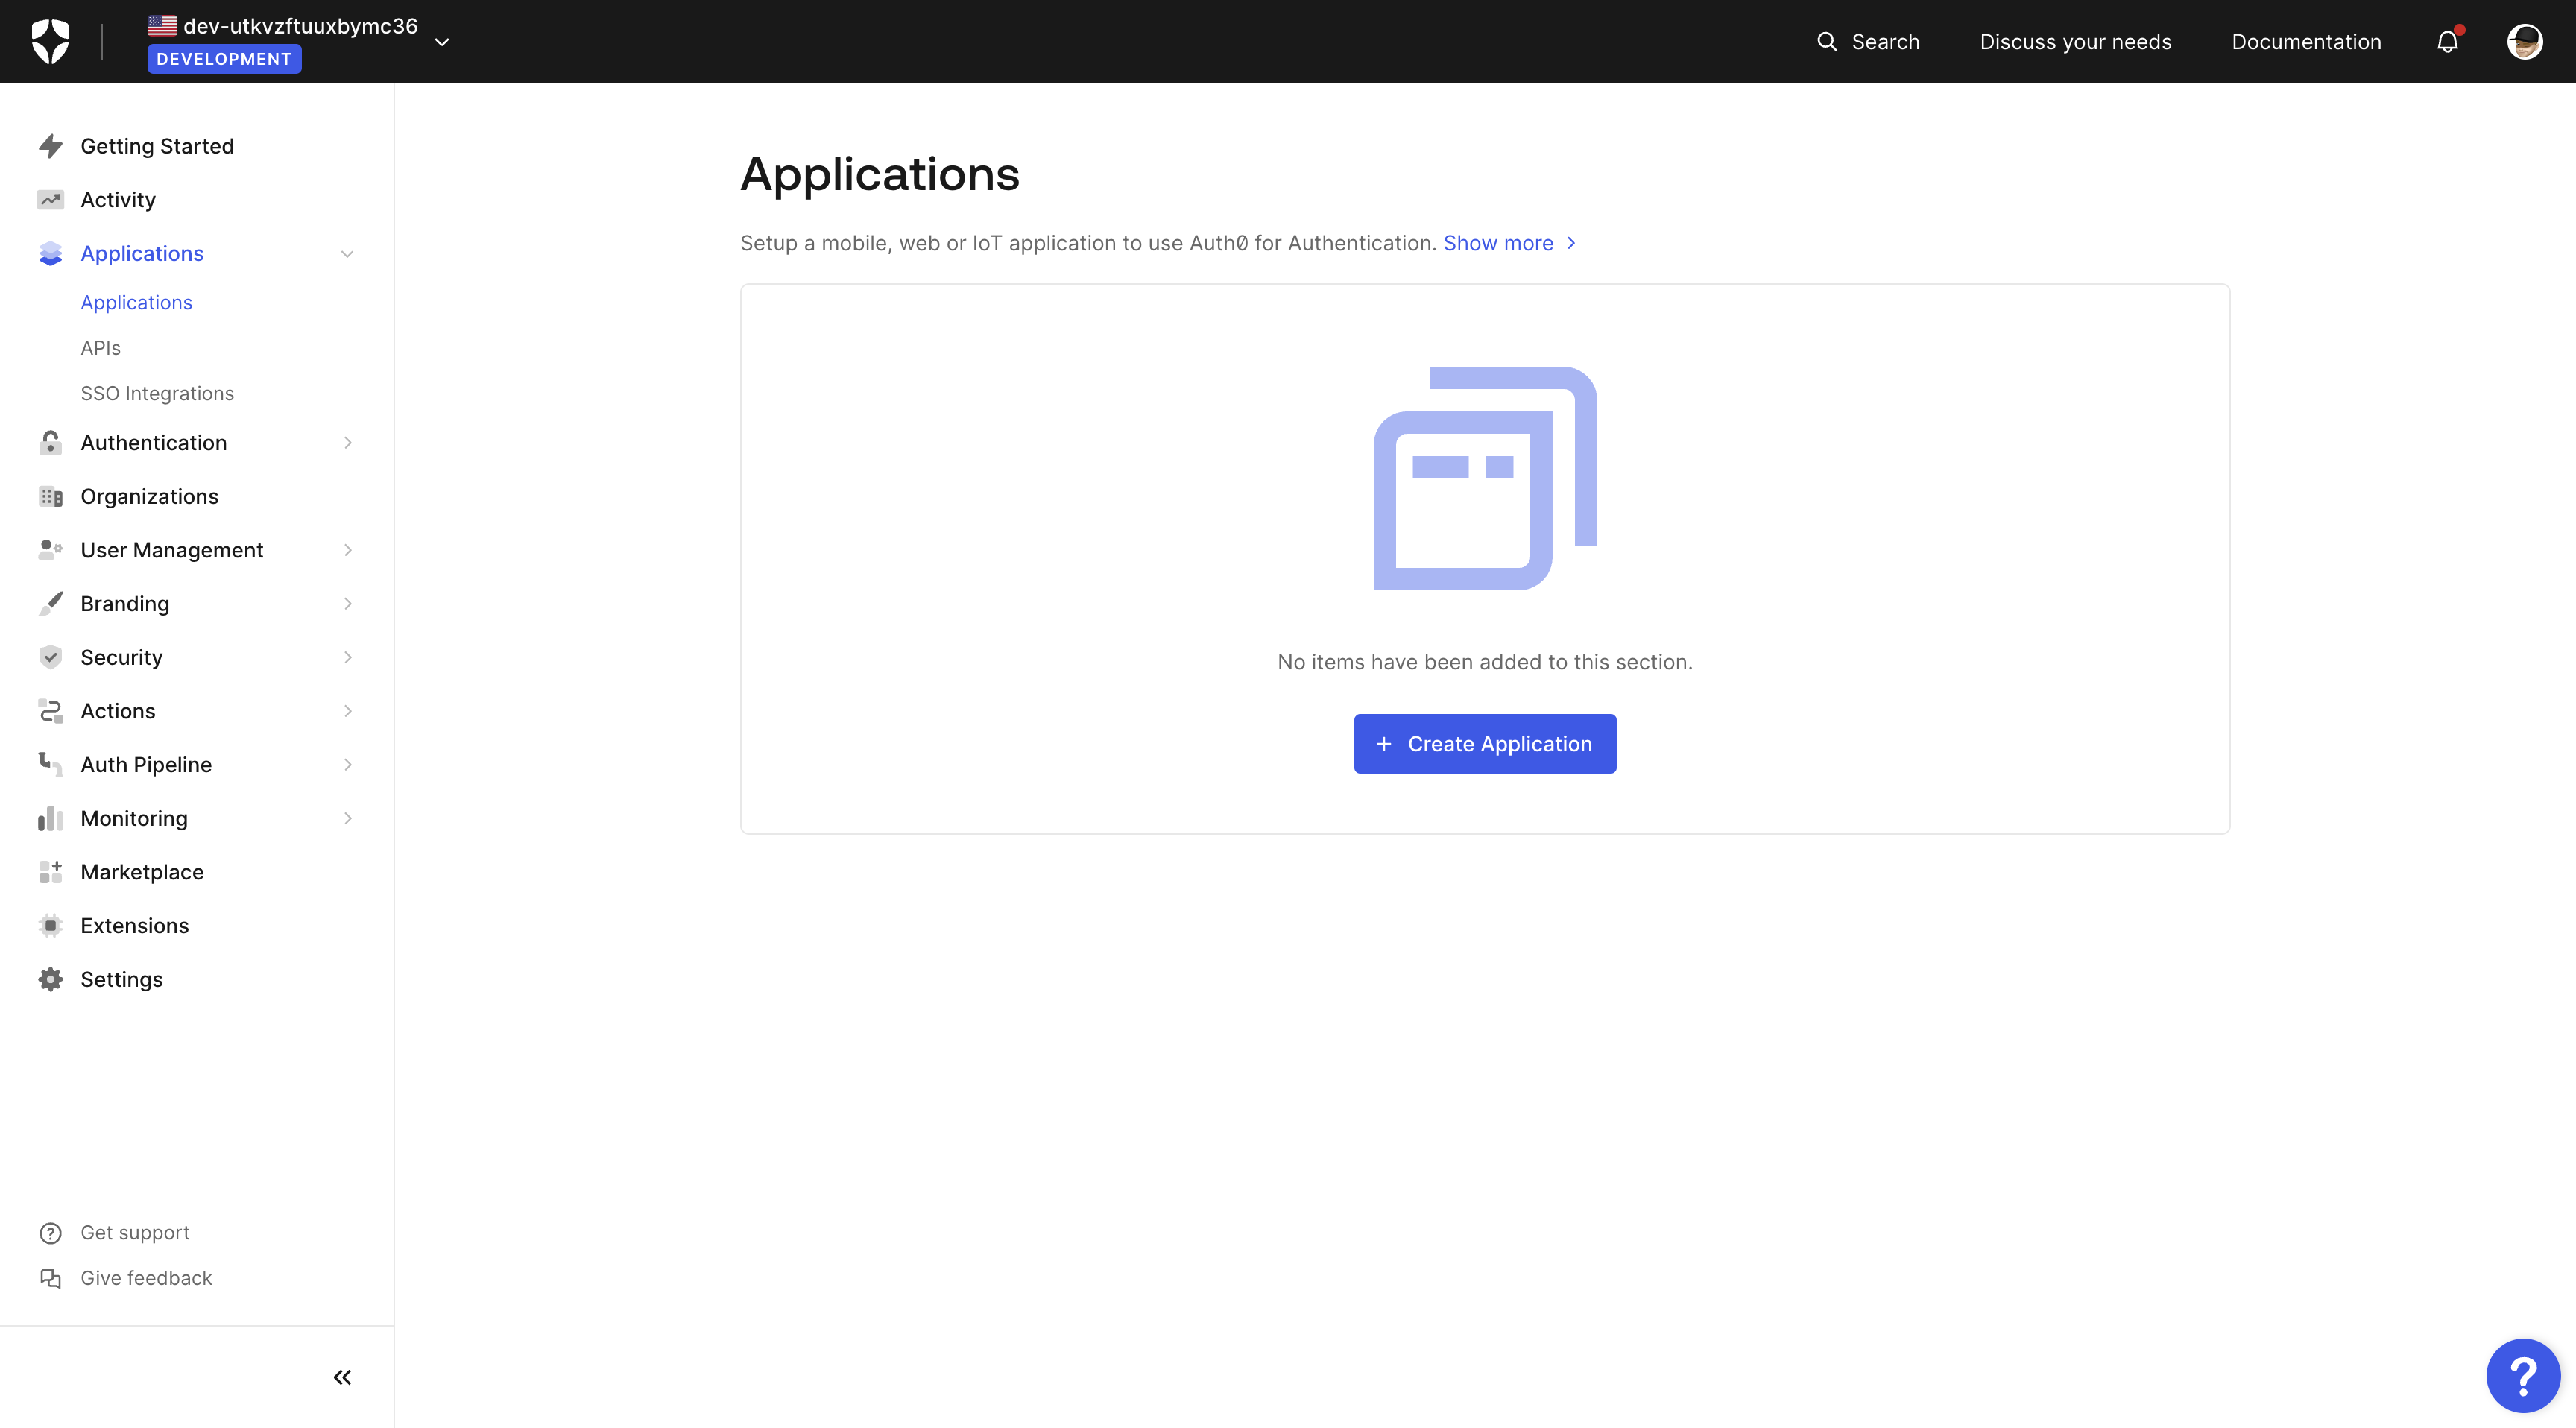 Auth0 Applications Page